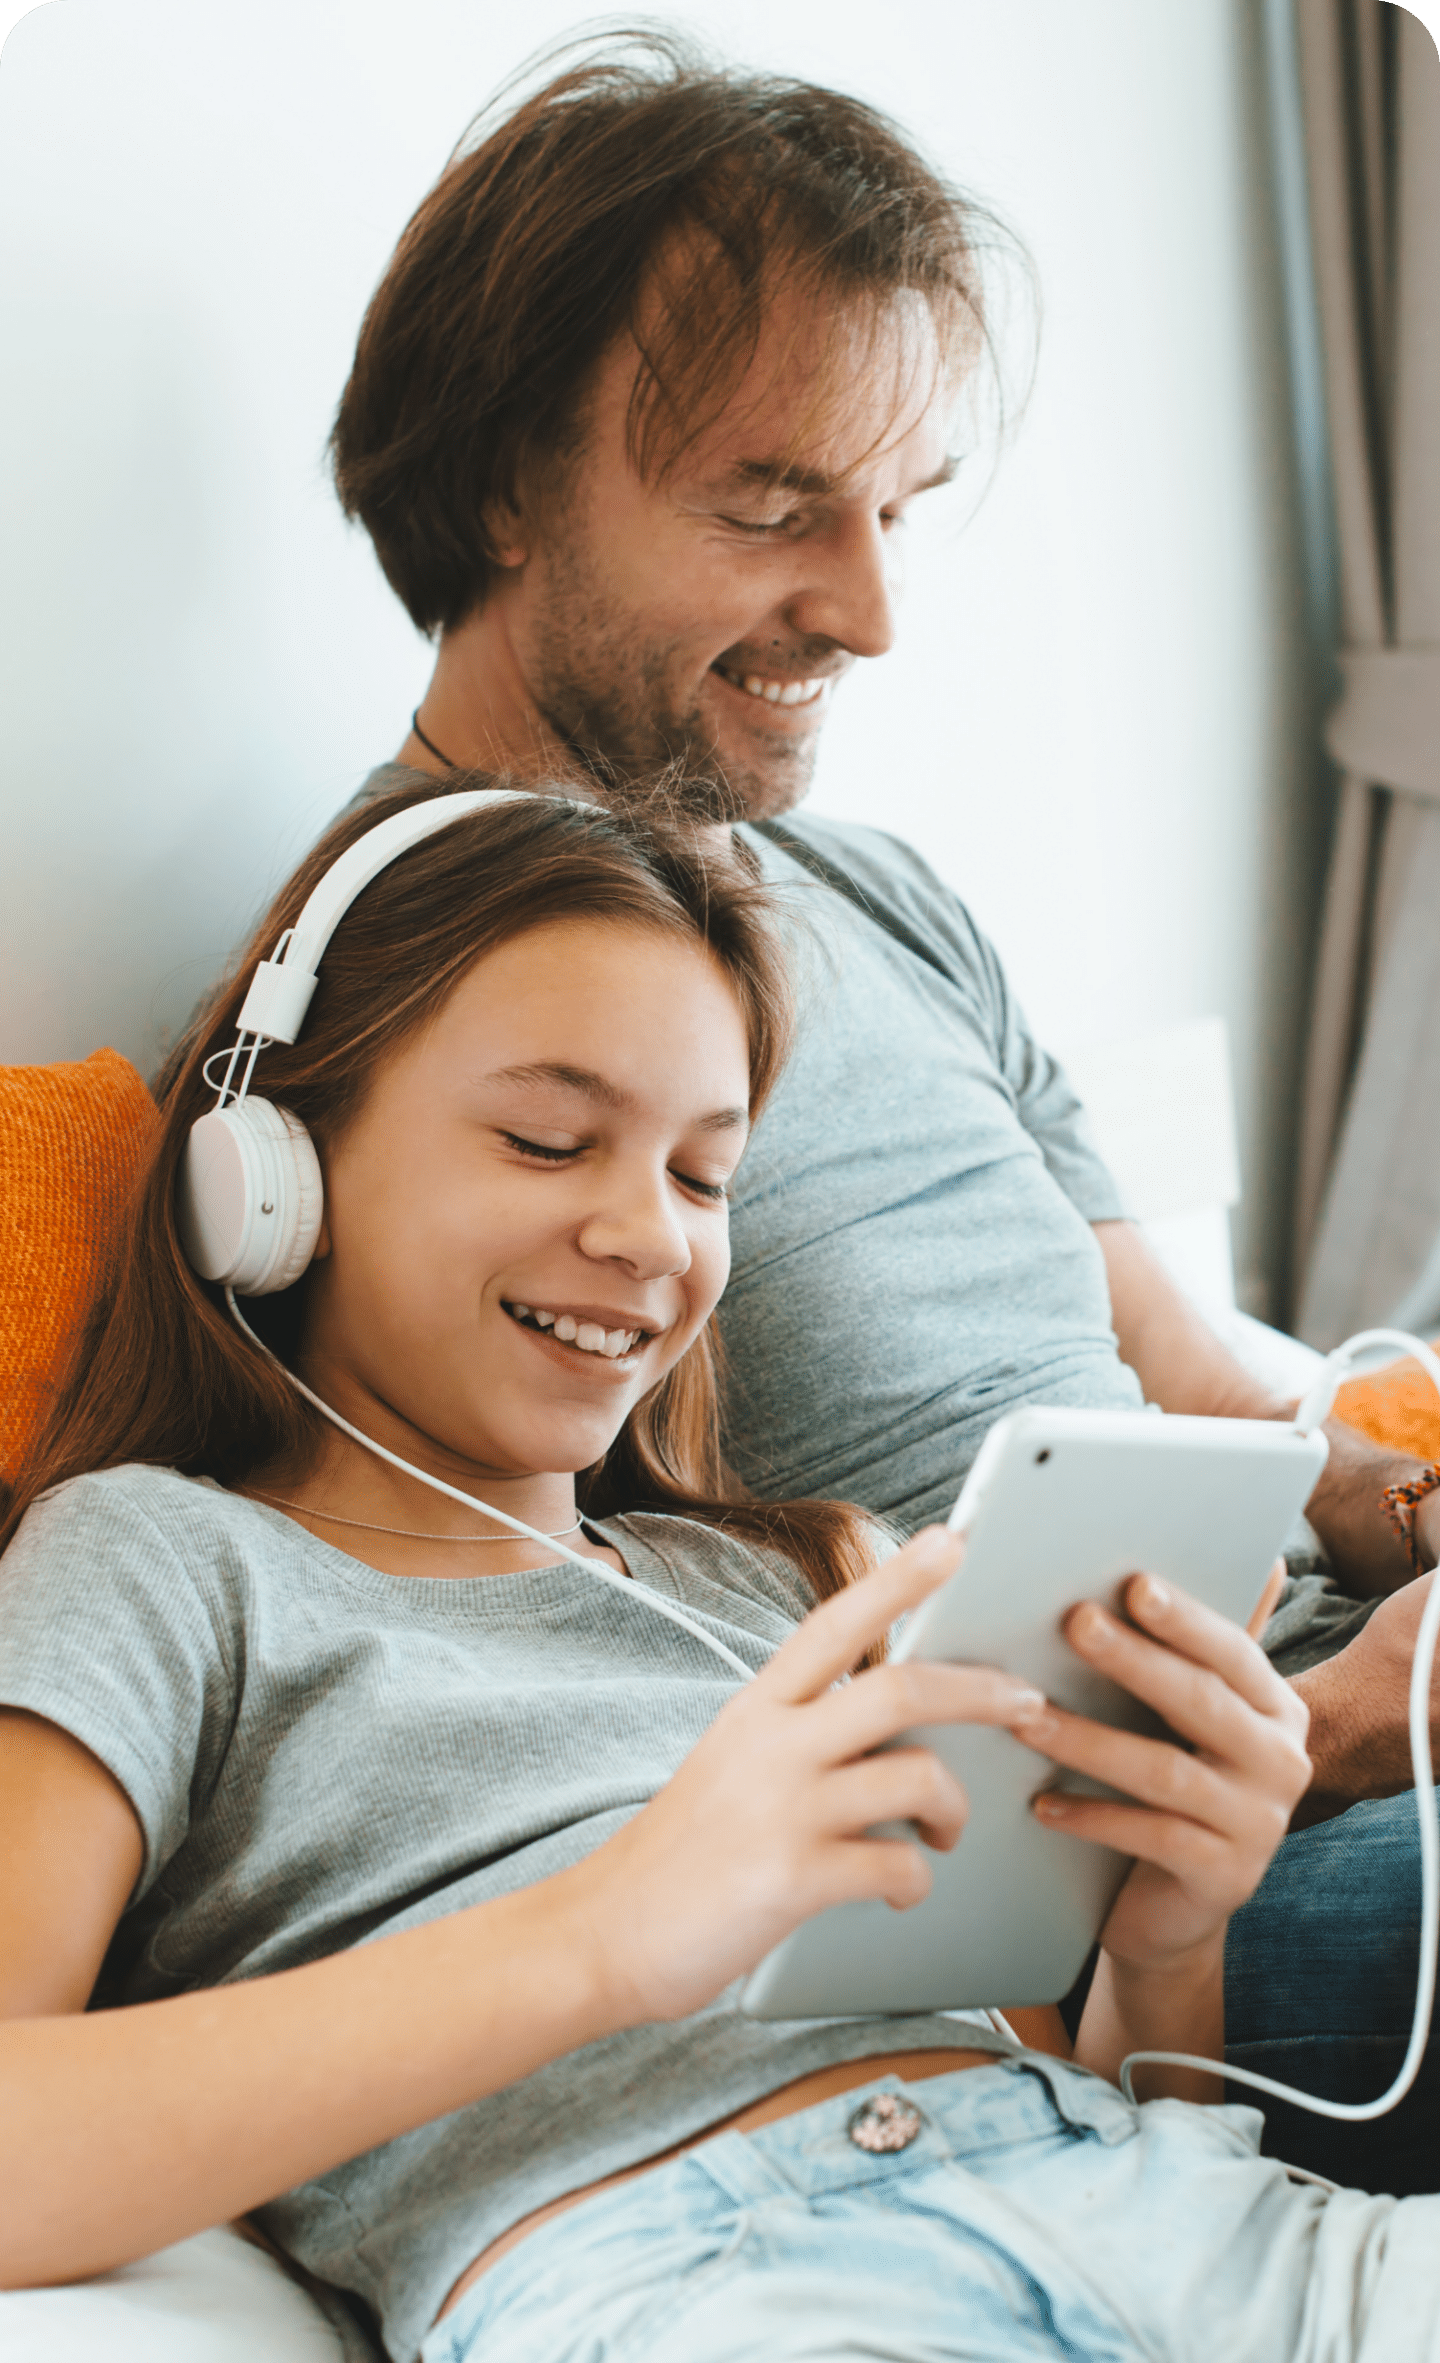 teen on phone with headphones with her dad